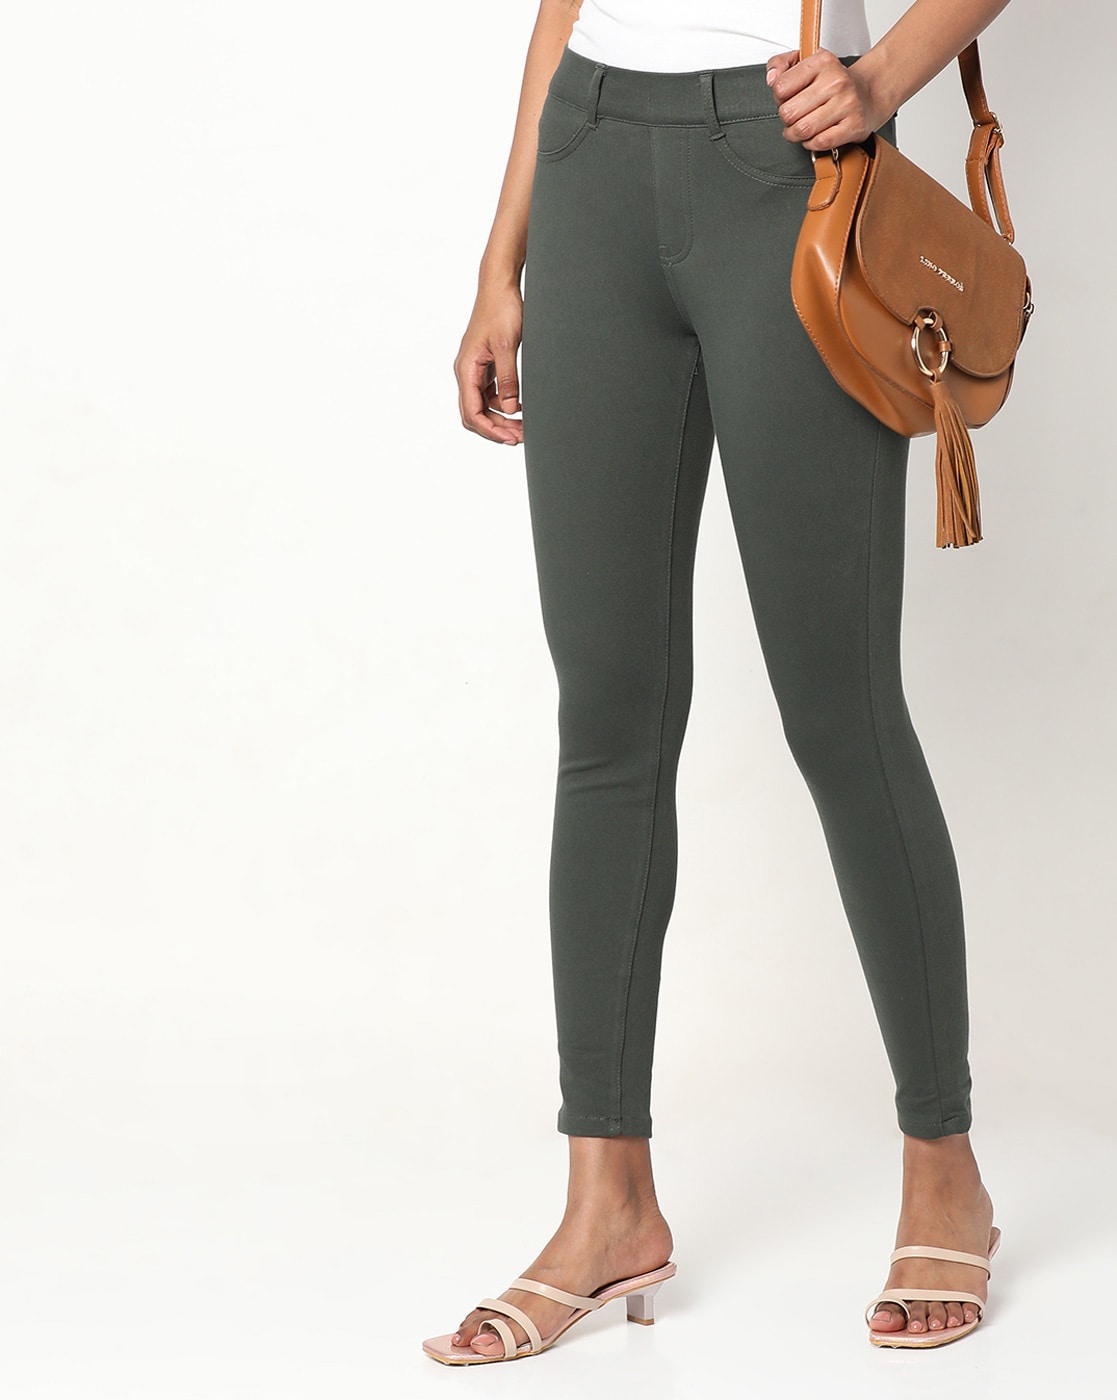 Ankle-Length Jeggings with Belt Loops